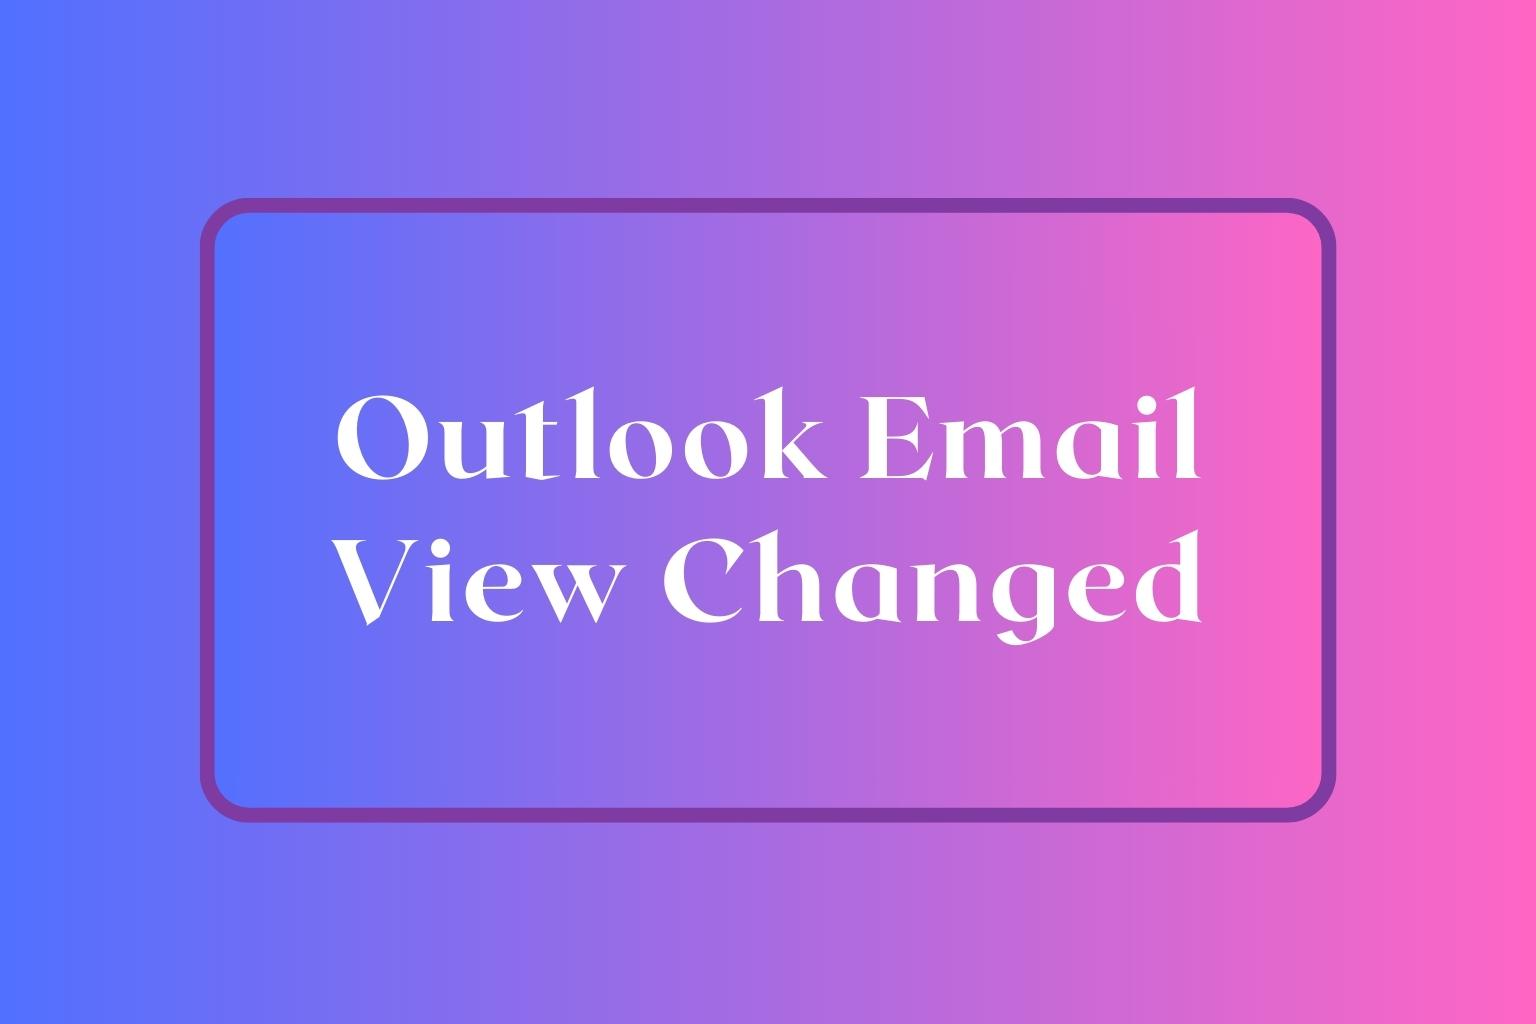 Outlook Email View Changed